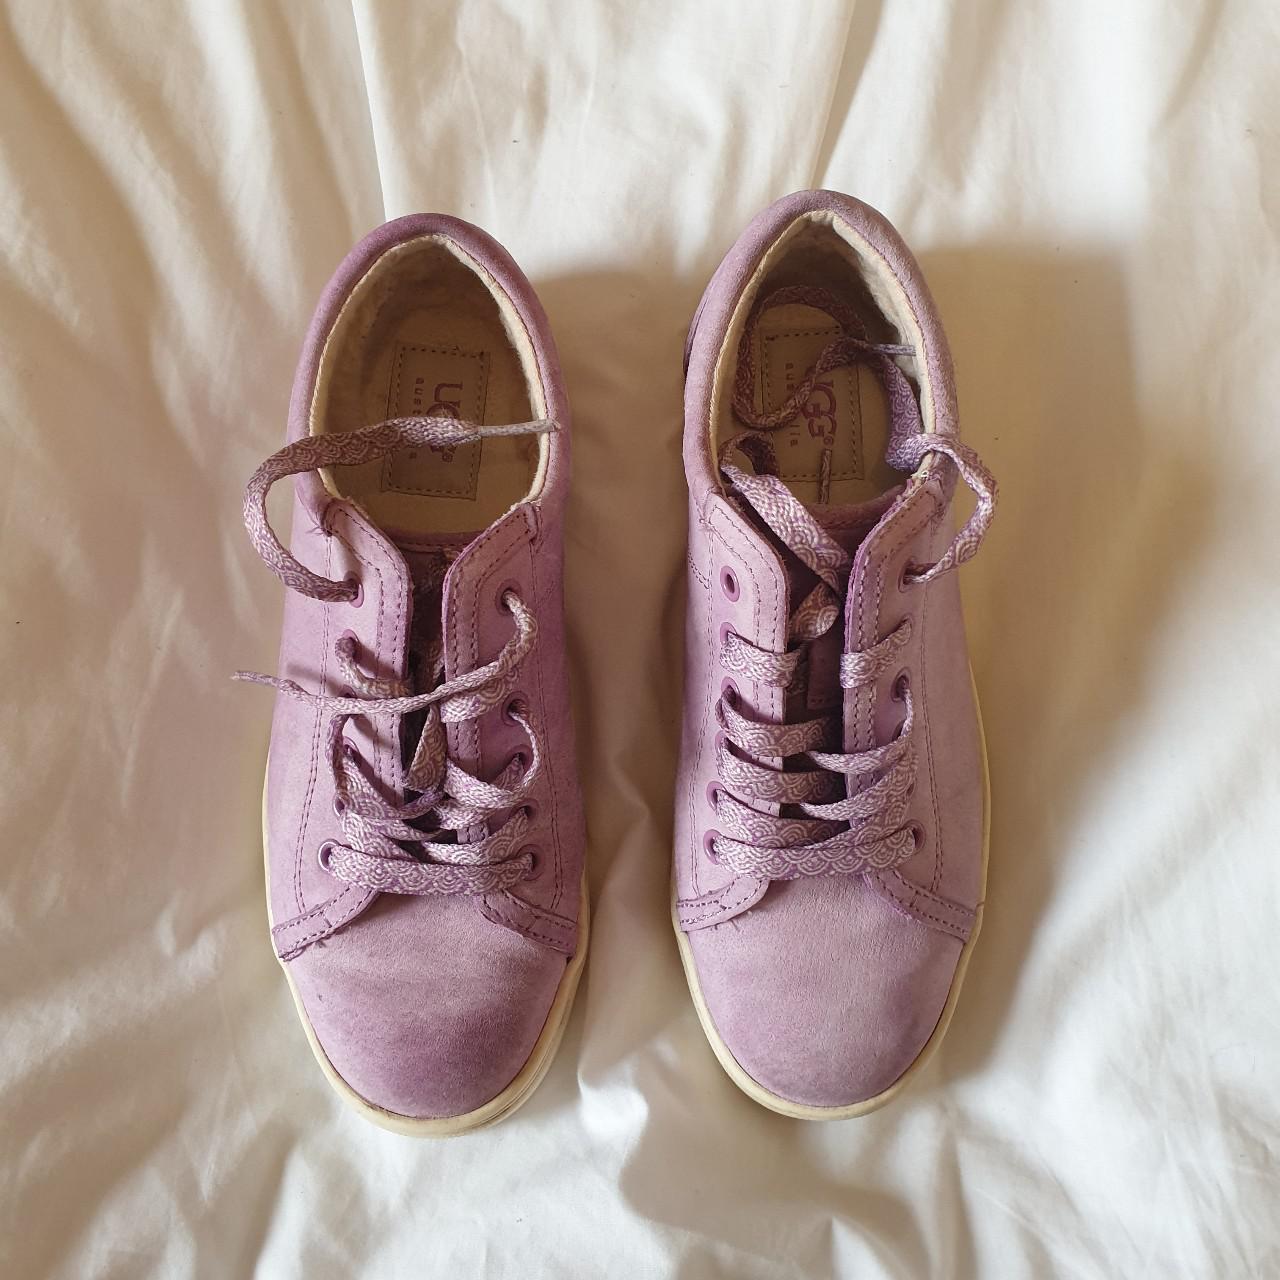 Product Image 1 - UGG TOMI suede sneakers 1008492
Perfect